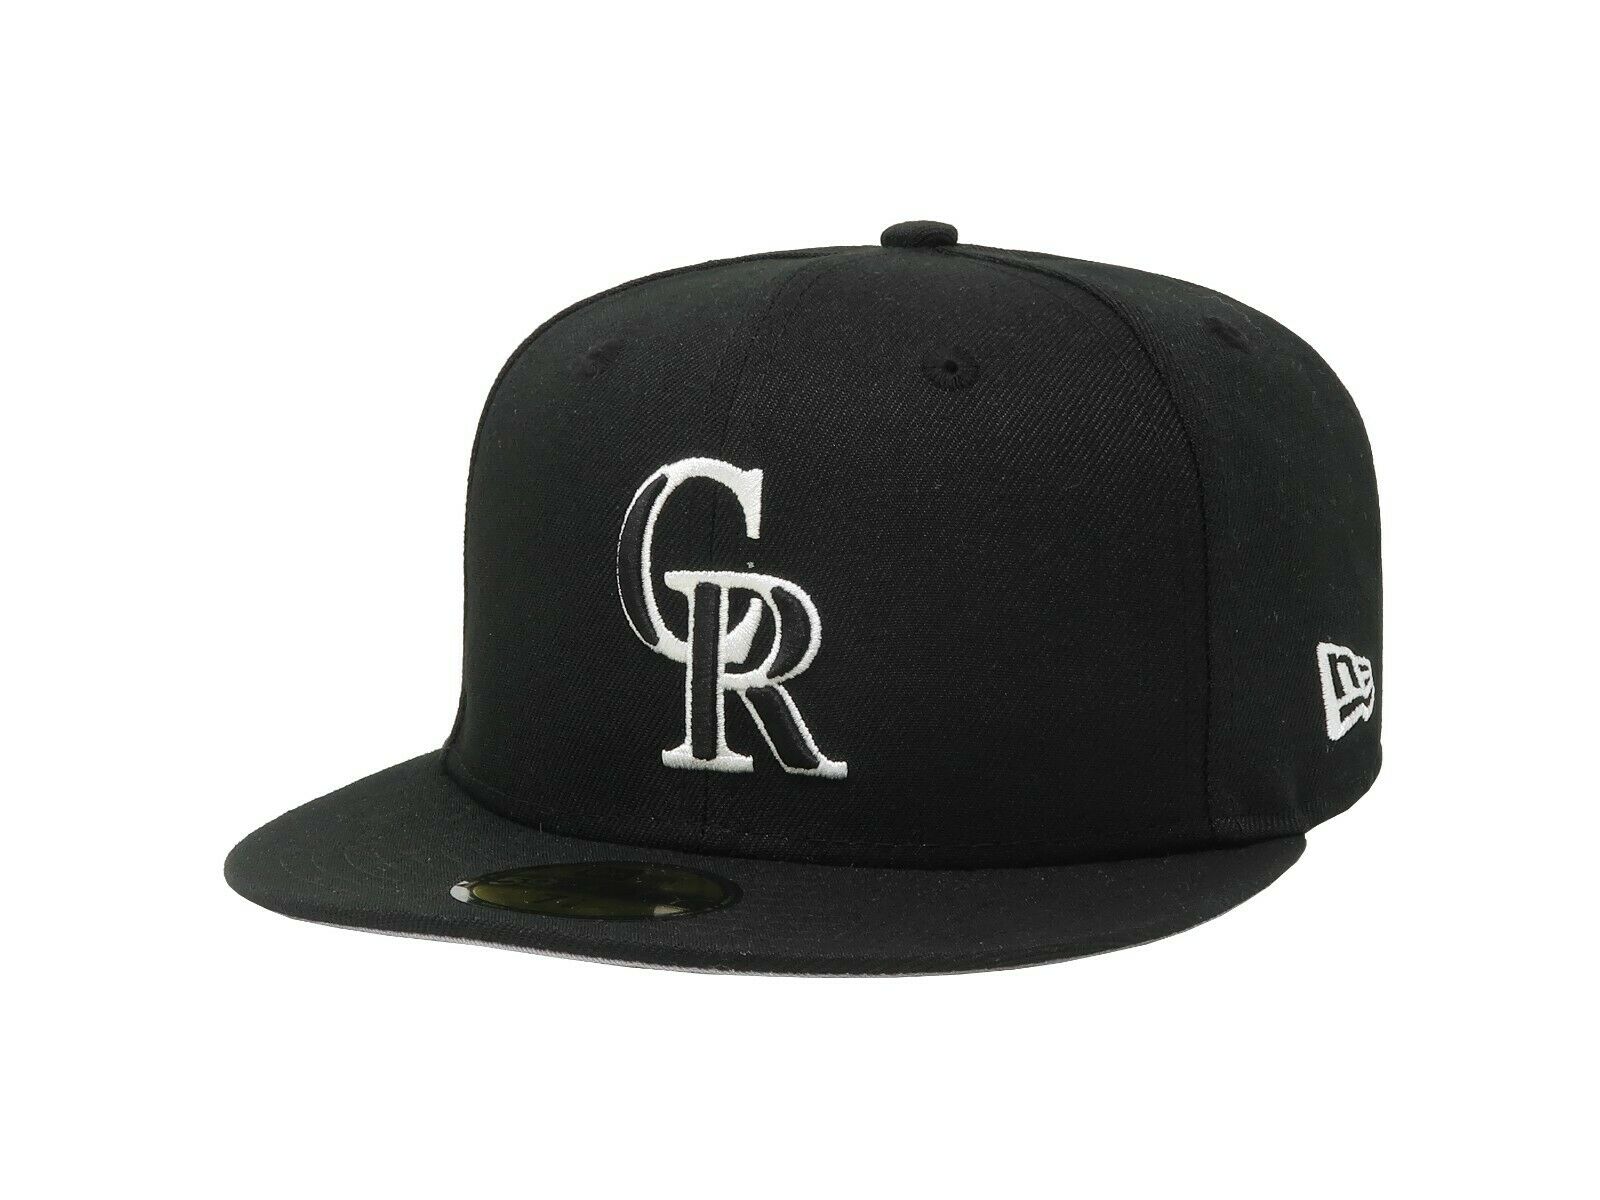 New Era 59Fifty Men's Cap MLB Basic Team Colorado Rockies Fitted Hat